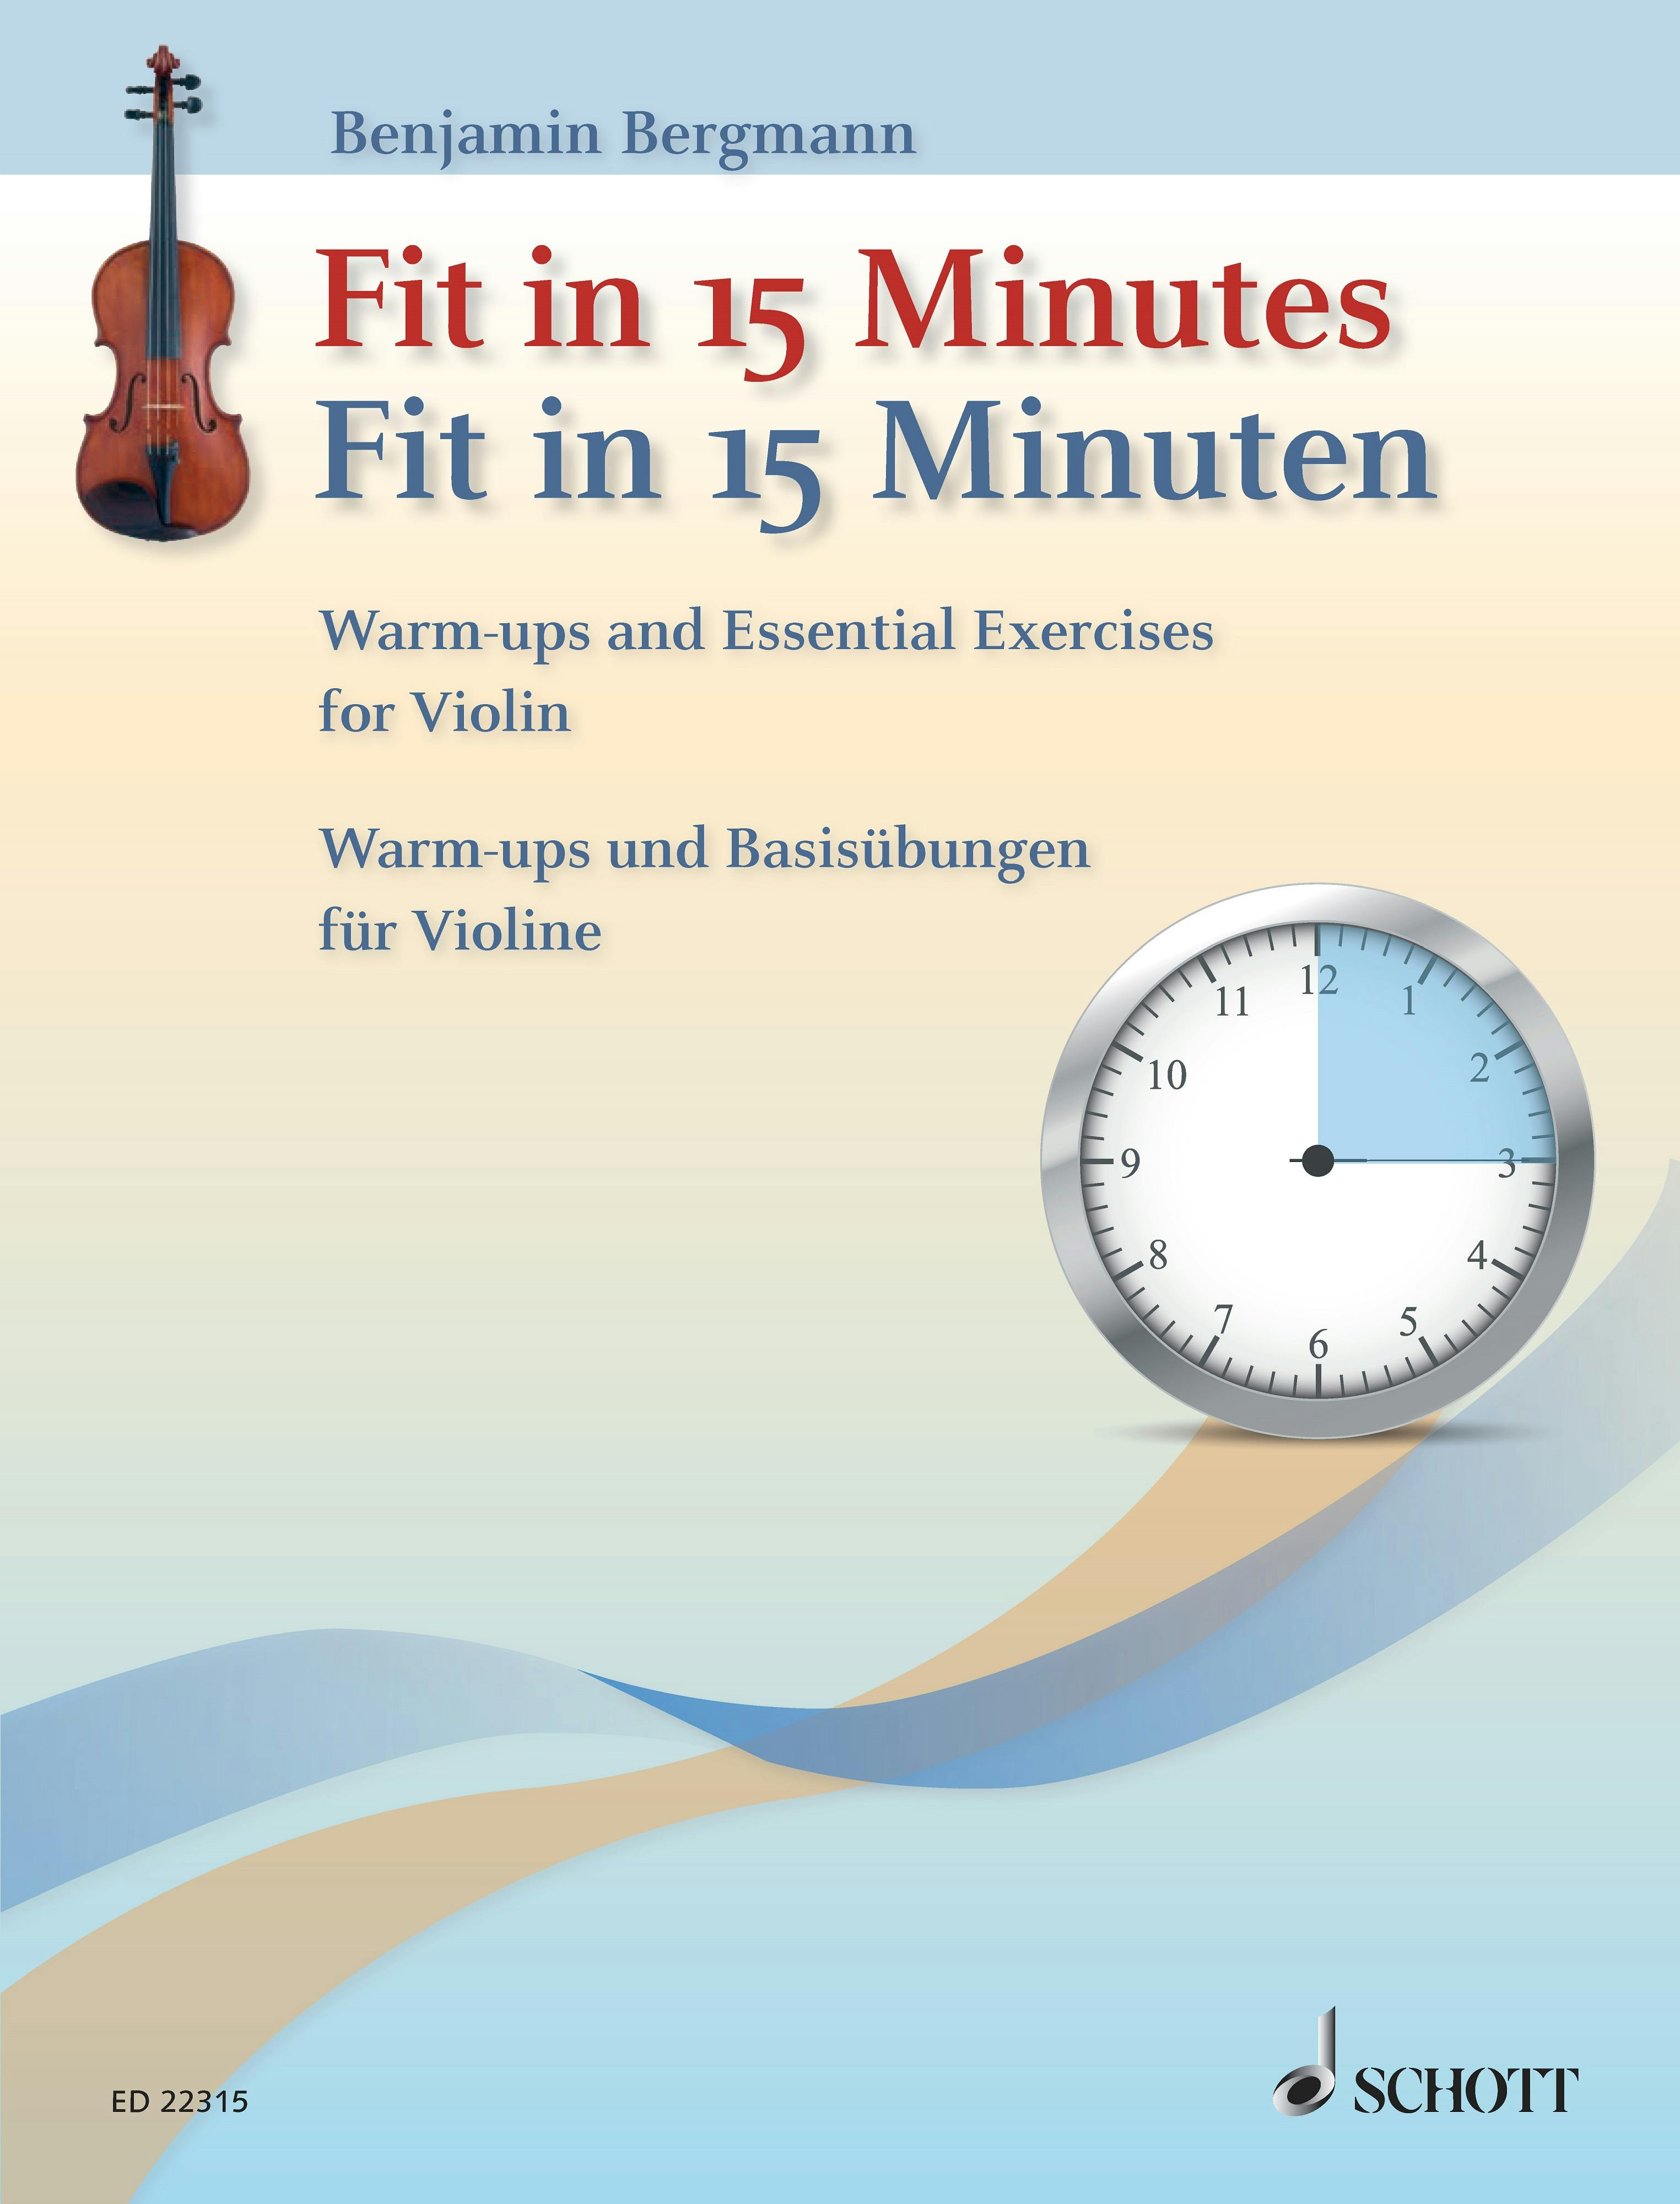 Fit in 15 Minutes: Warm-ups and Essential Exercises for Violin - Benjamin Bergmann